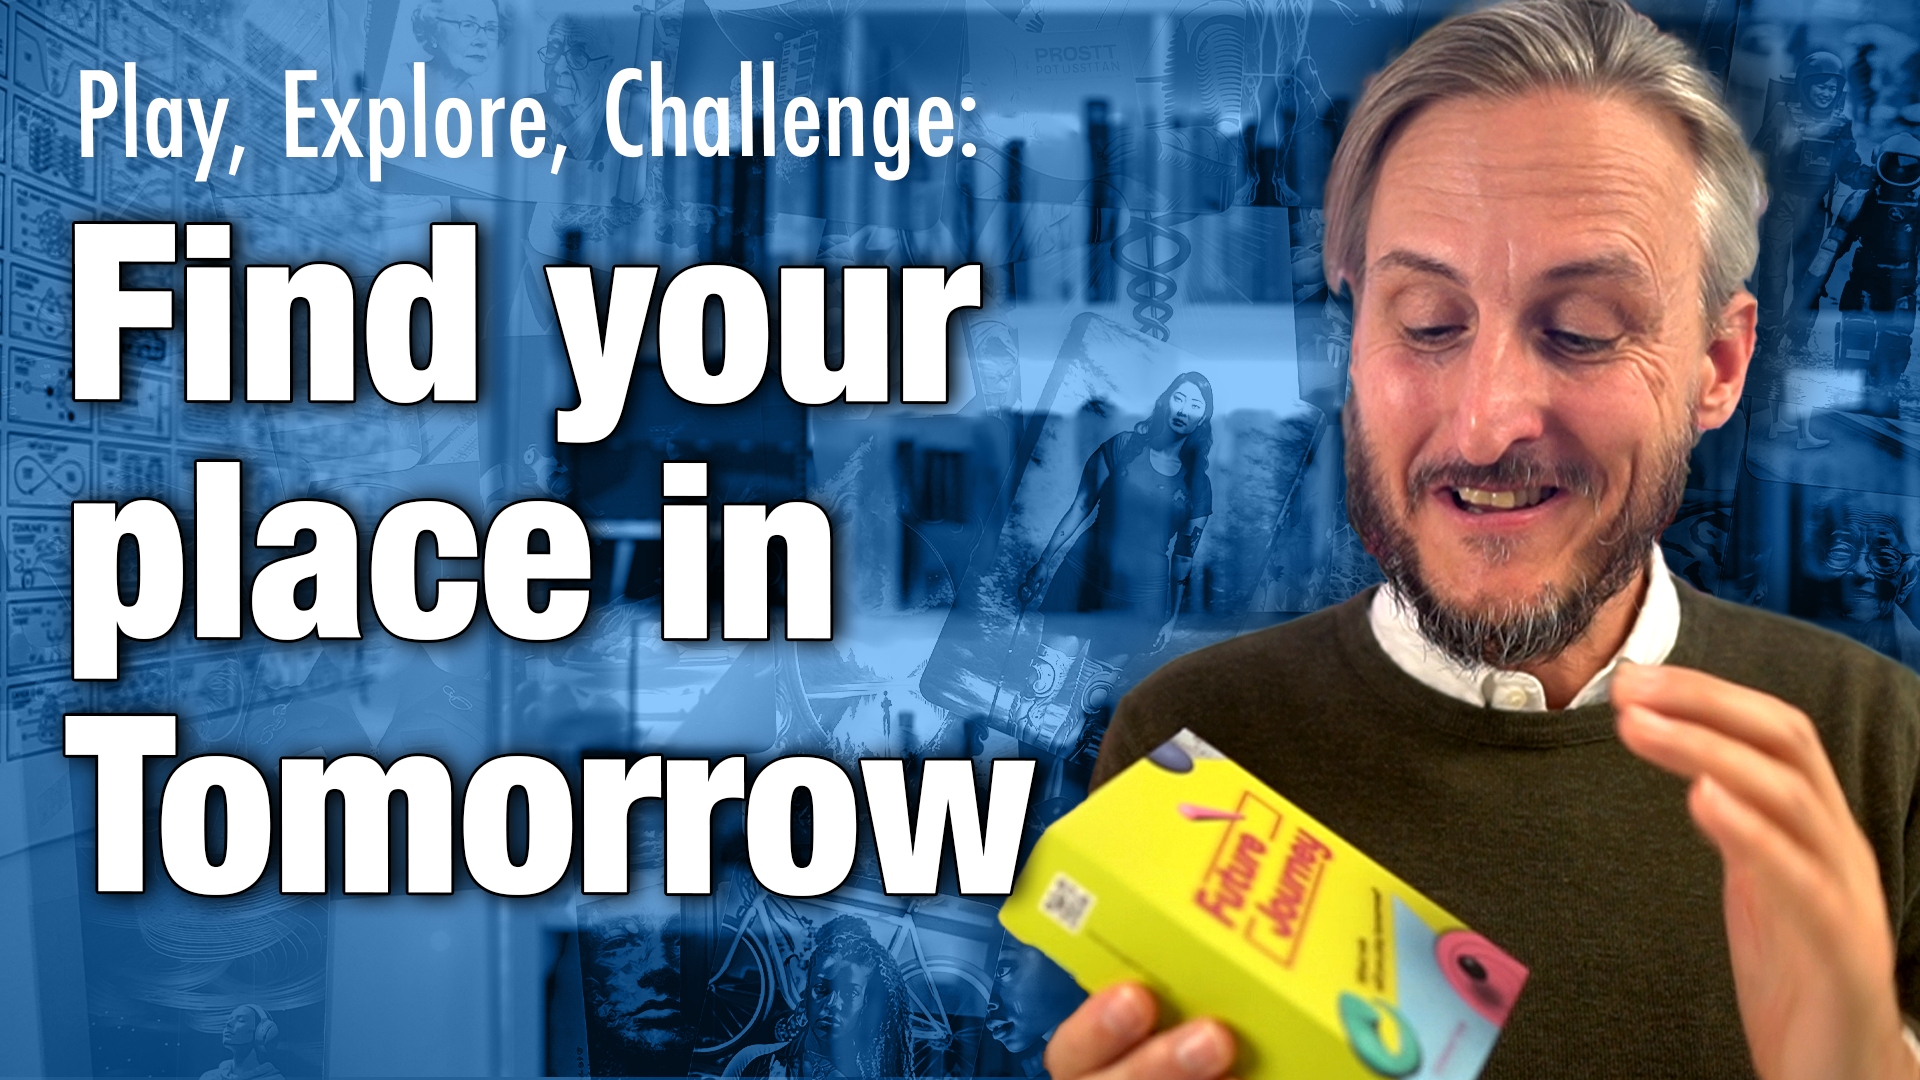 Play, Explore, Challenge: Find your place in Tomorrow